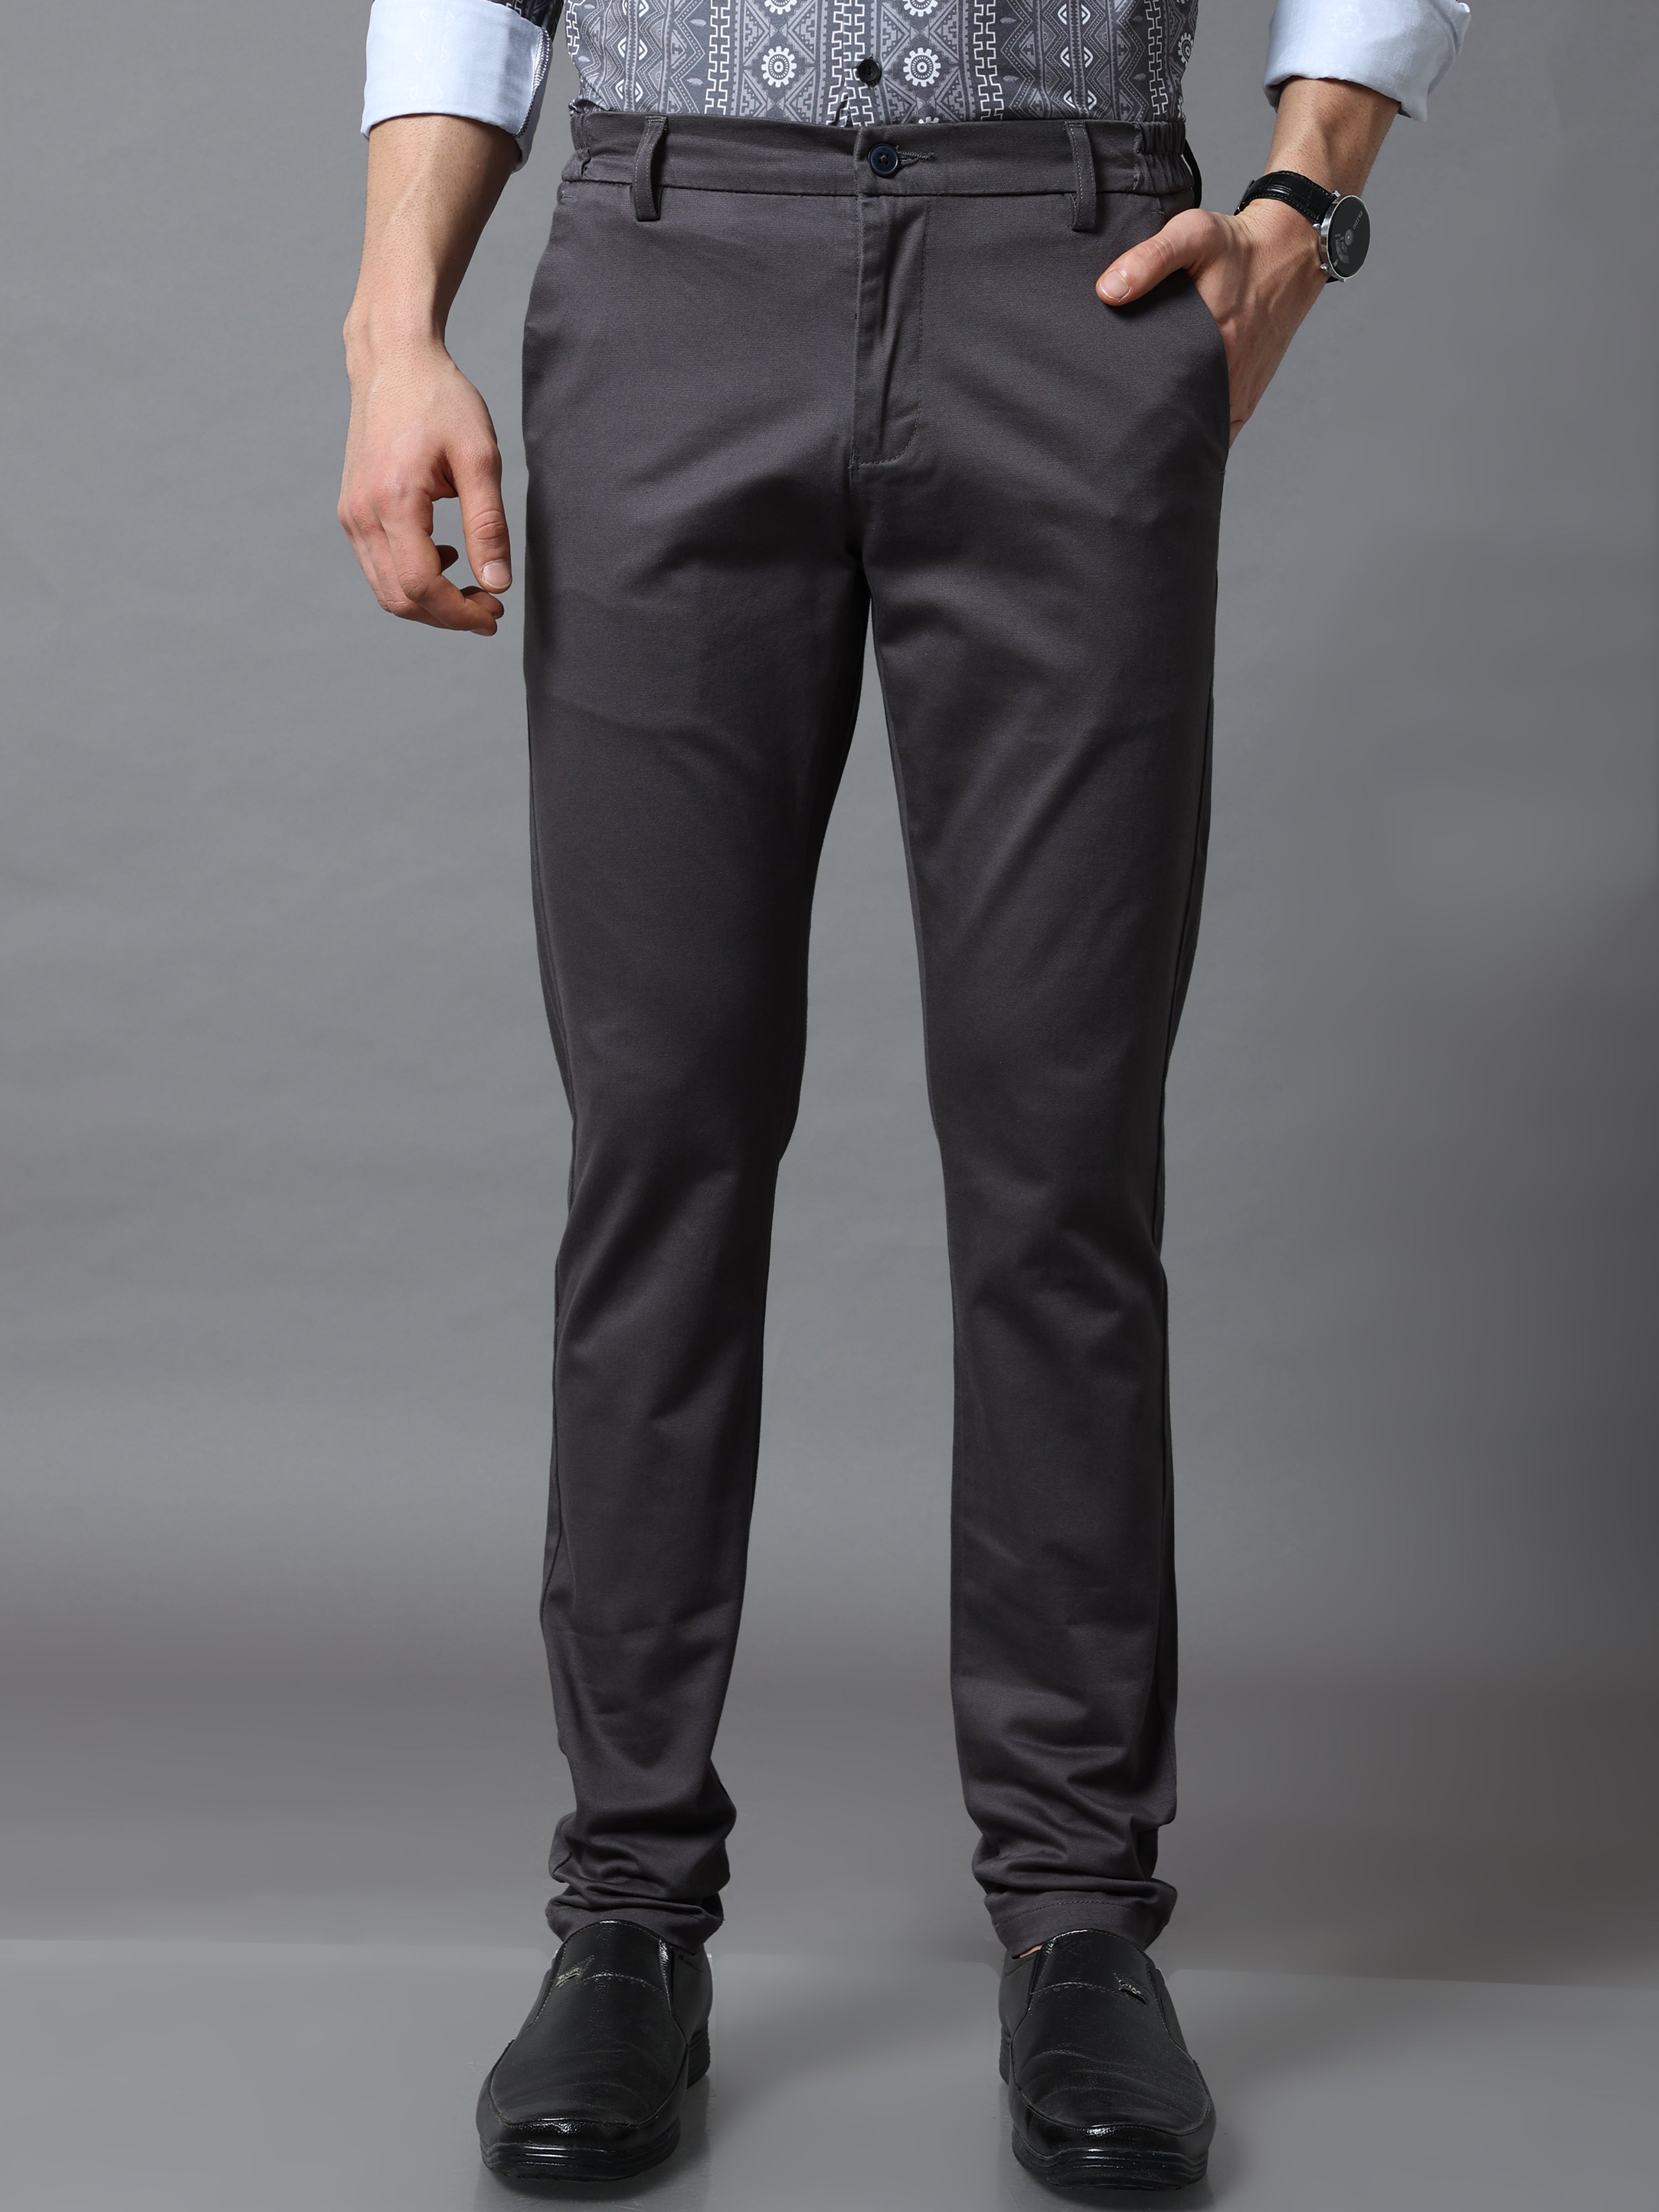 BiggerMen Clothing - Quality chino trousers by Club of Comfort, exclusively  available in store. Sizes between 42 and 60 inch waist. Pure cotton and  stretchable fabric for that extra comfort . | Facebook